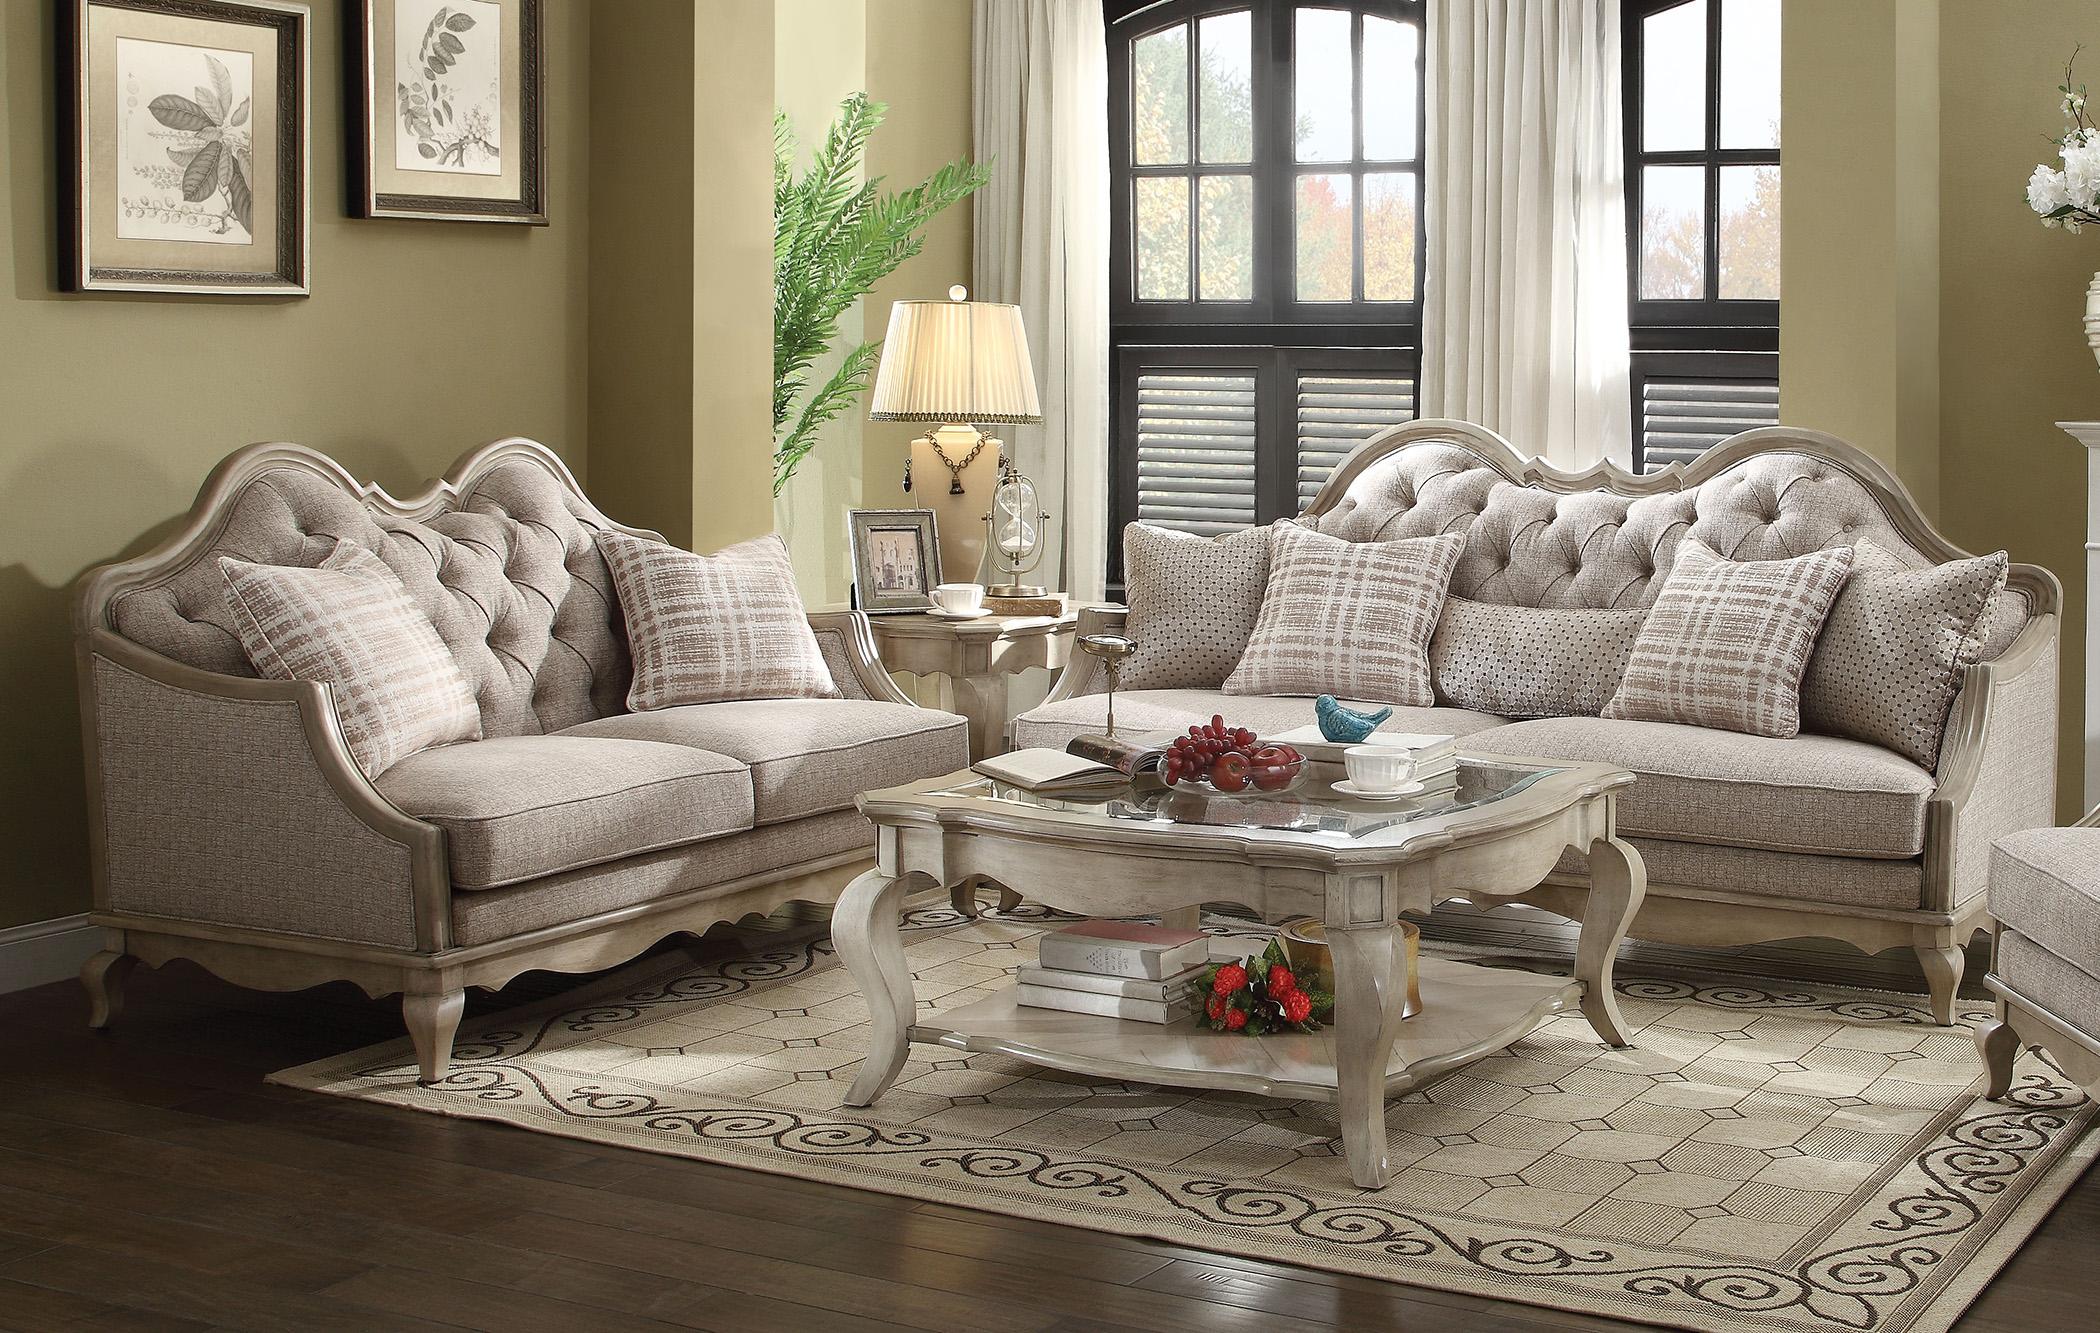 

    
Beige & Antique Taupe Tufted Sofa Set 2Pcs Chelmsford-56050 Acme Traditional
